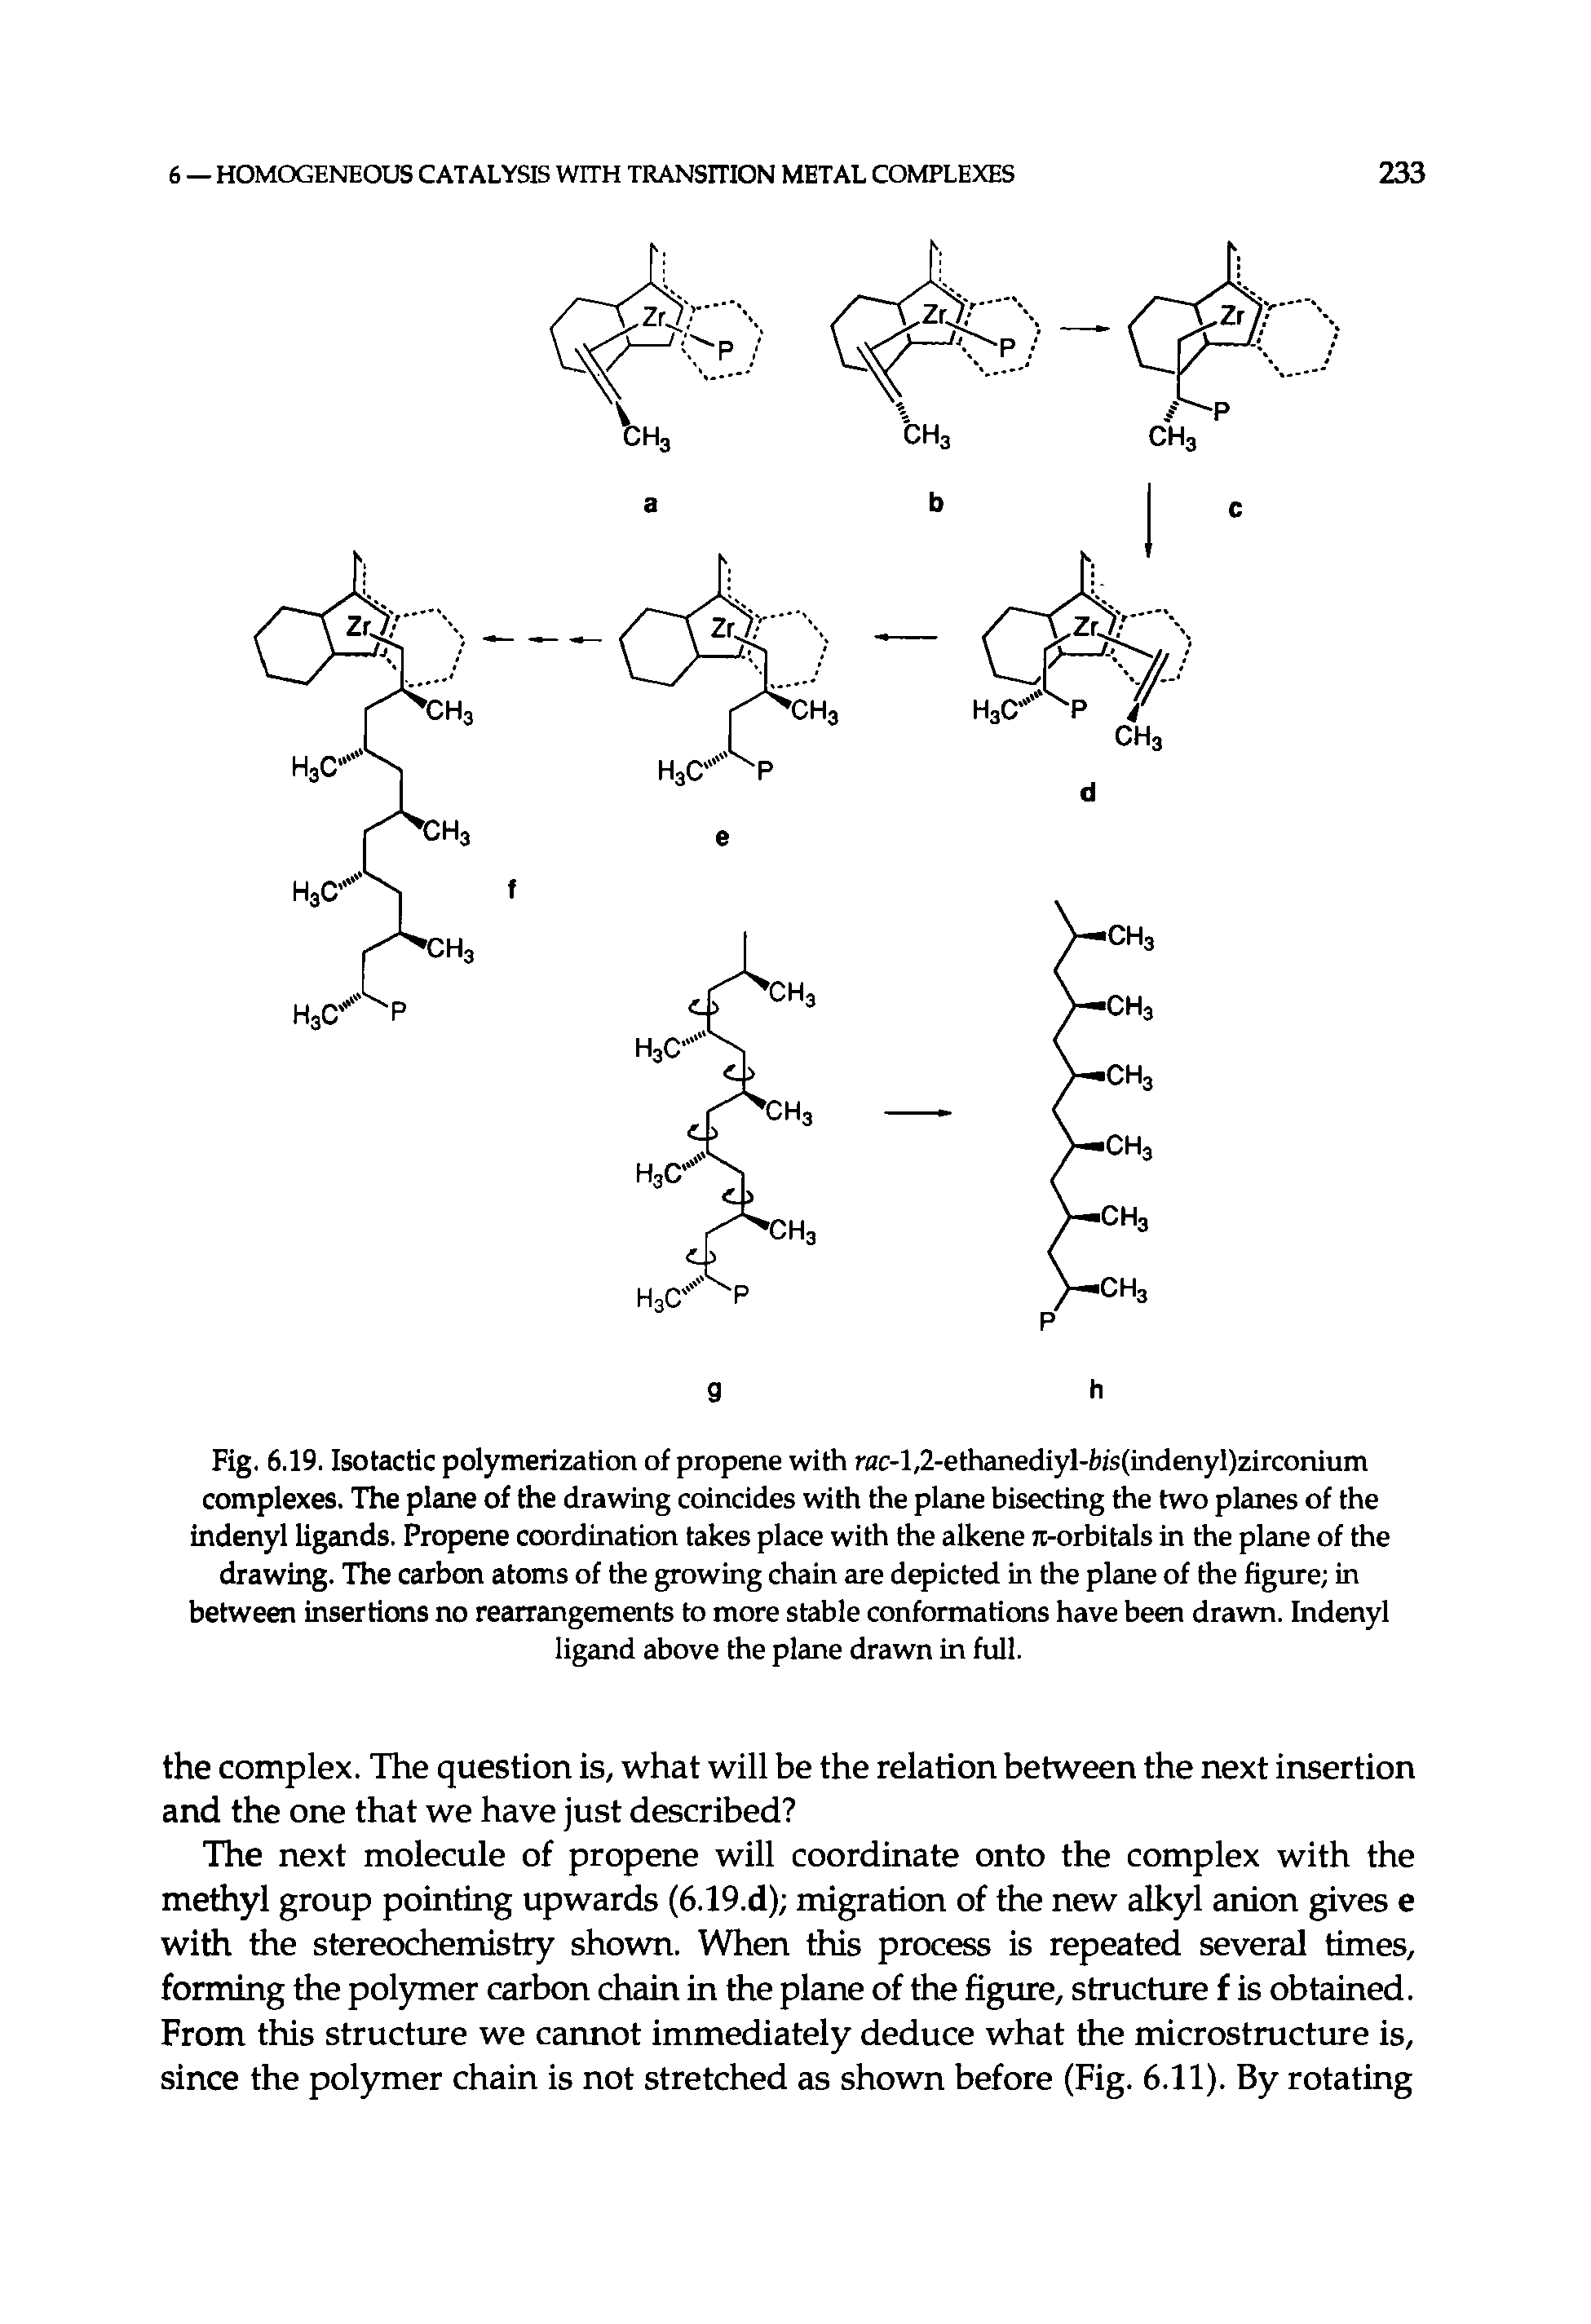 Fig. 6.19. Isotactic polymerization of propene with rac-l,2-ethanediyl-bis(indenyl)zirconium complexes. The plane of the drawing coincides with the plane bisecting the two planes of the indenyl ligands. Propene coordination takes place with the alkene Tt-orbitals in the plane of the drawing. The carbon atoms of the growing chain are depicted in the plane of the figure in between insertions no rearrangements to more stable conformations have been drawn. Indenyl ligand above the plane drawn in full.